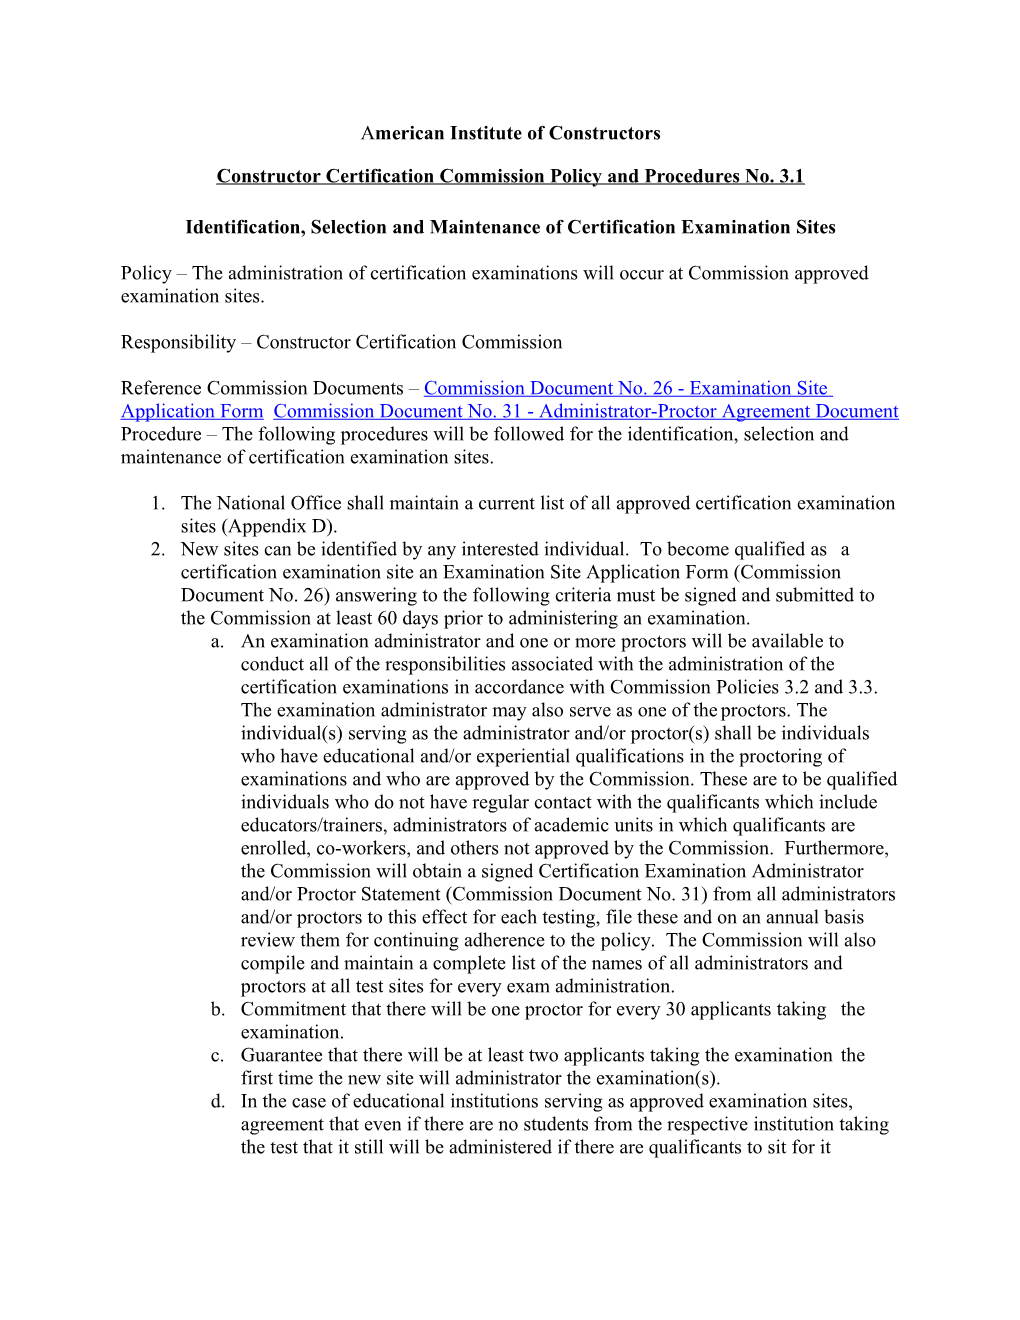 Constructor Certification Commission Policy and Procedures No. 3.1